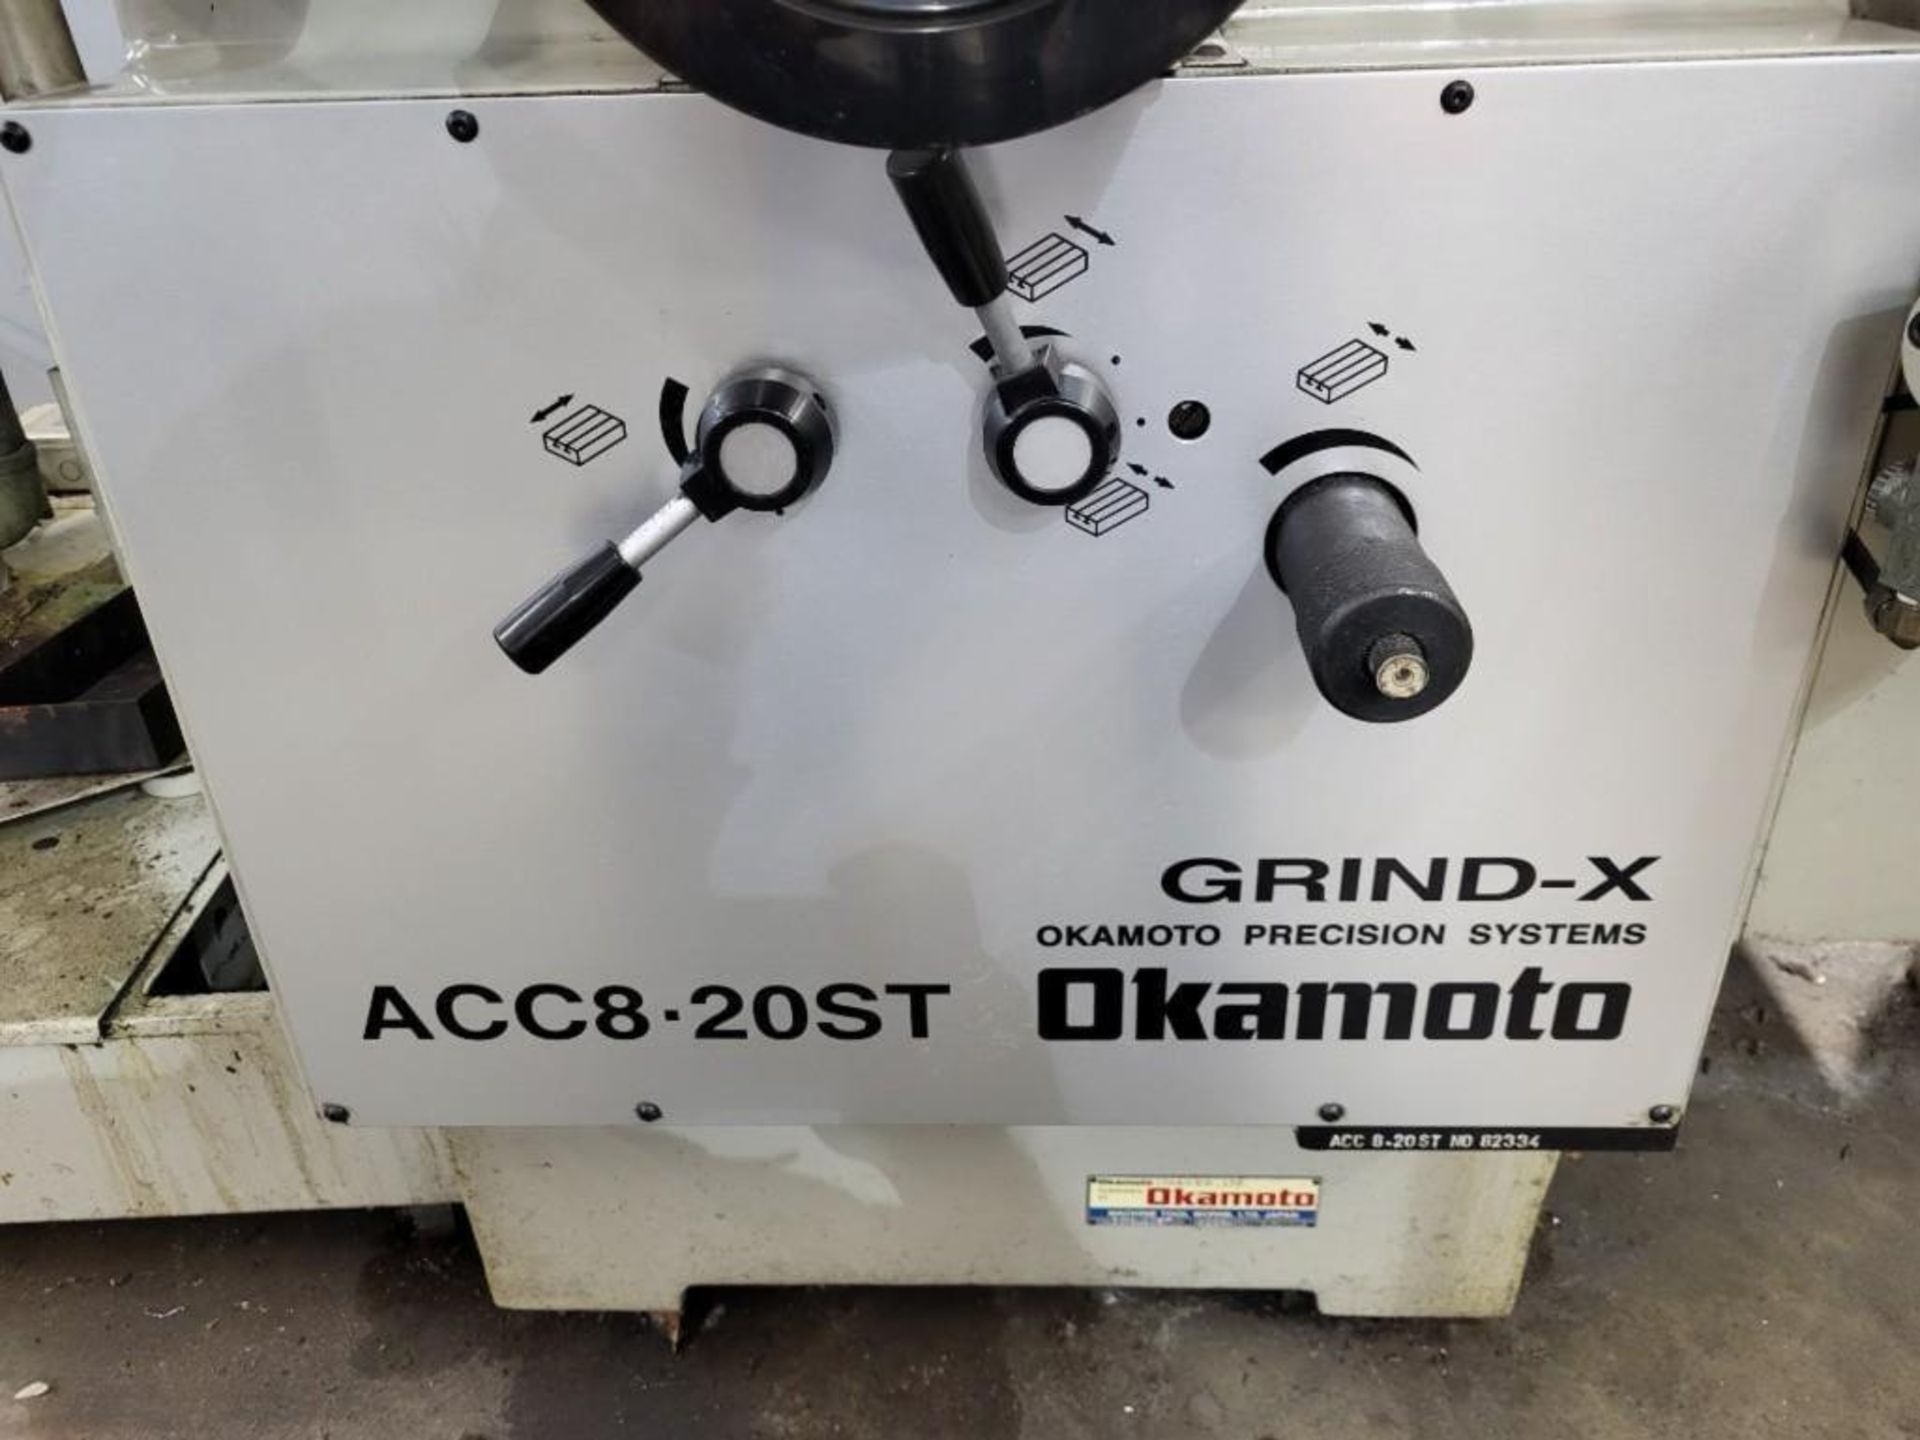 OKAMOTO ACC8.20ST HYDRAULIC AUTOMATIC SURFACE GRINDER, 2012 - Image 6 of 16